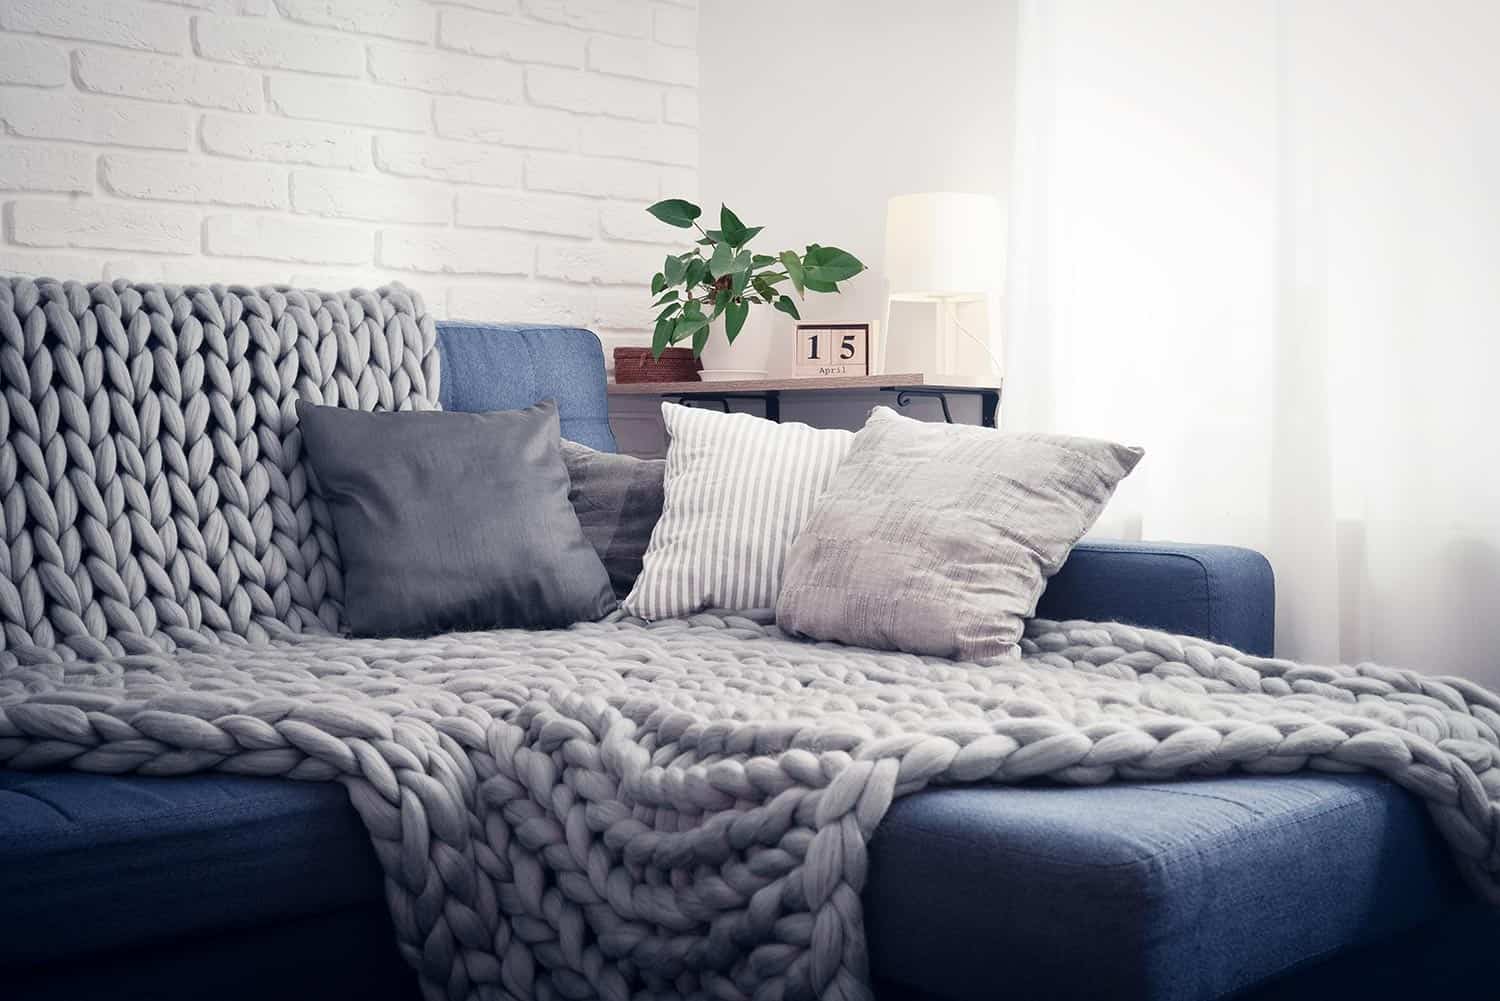 Gray knitted blanket from merino wool on couch with pillows